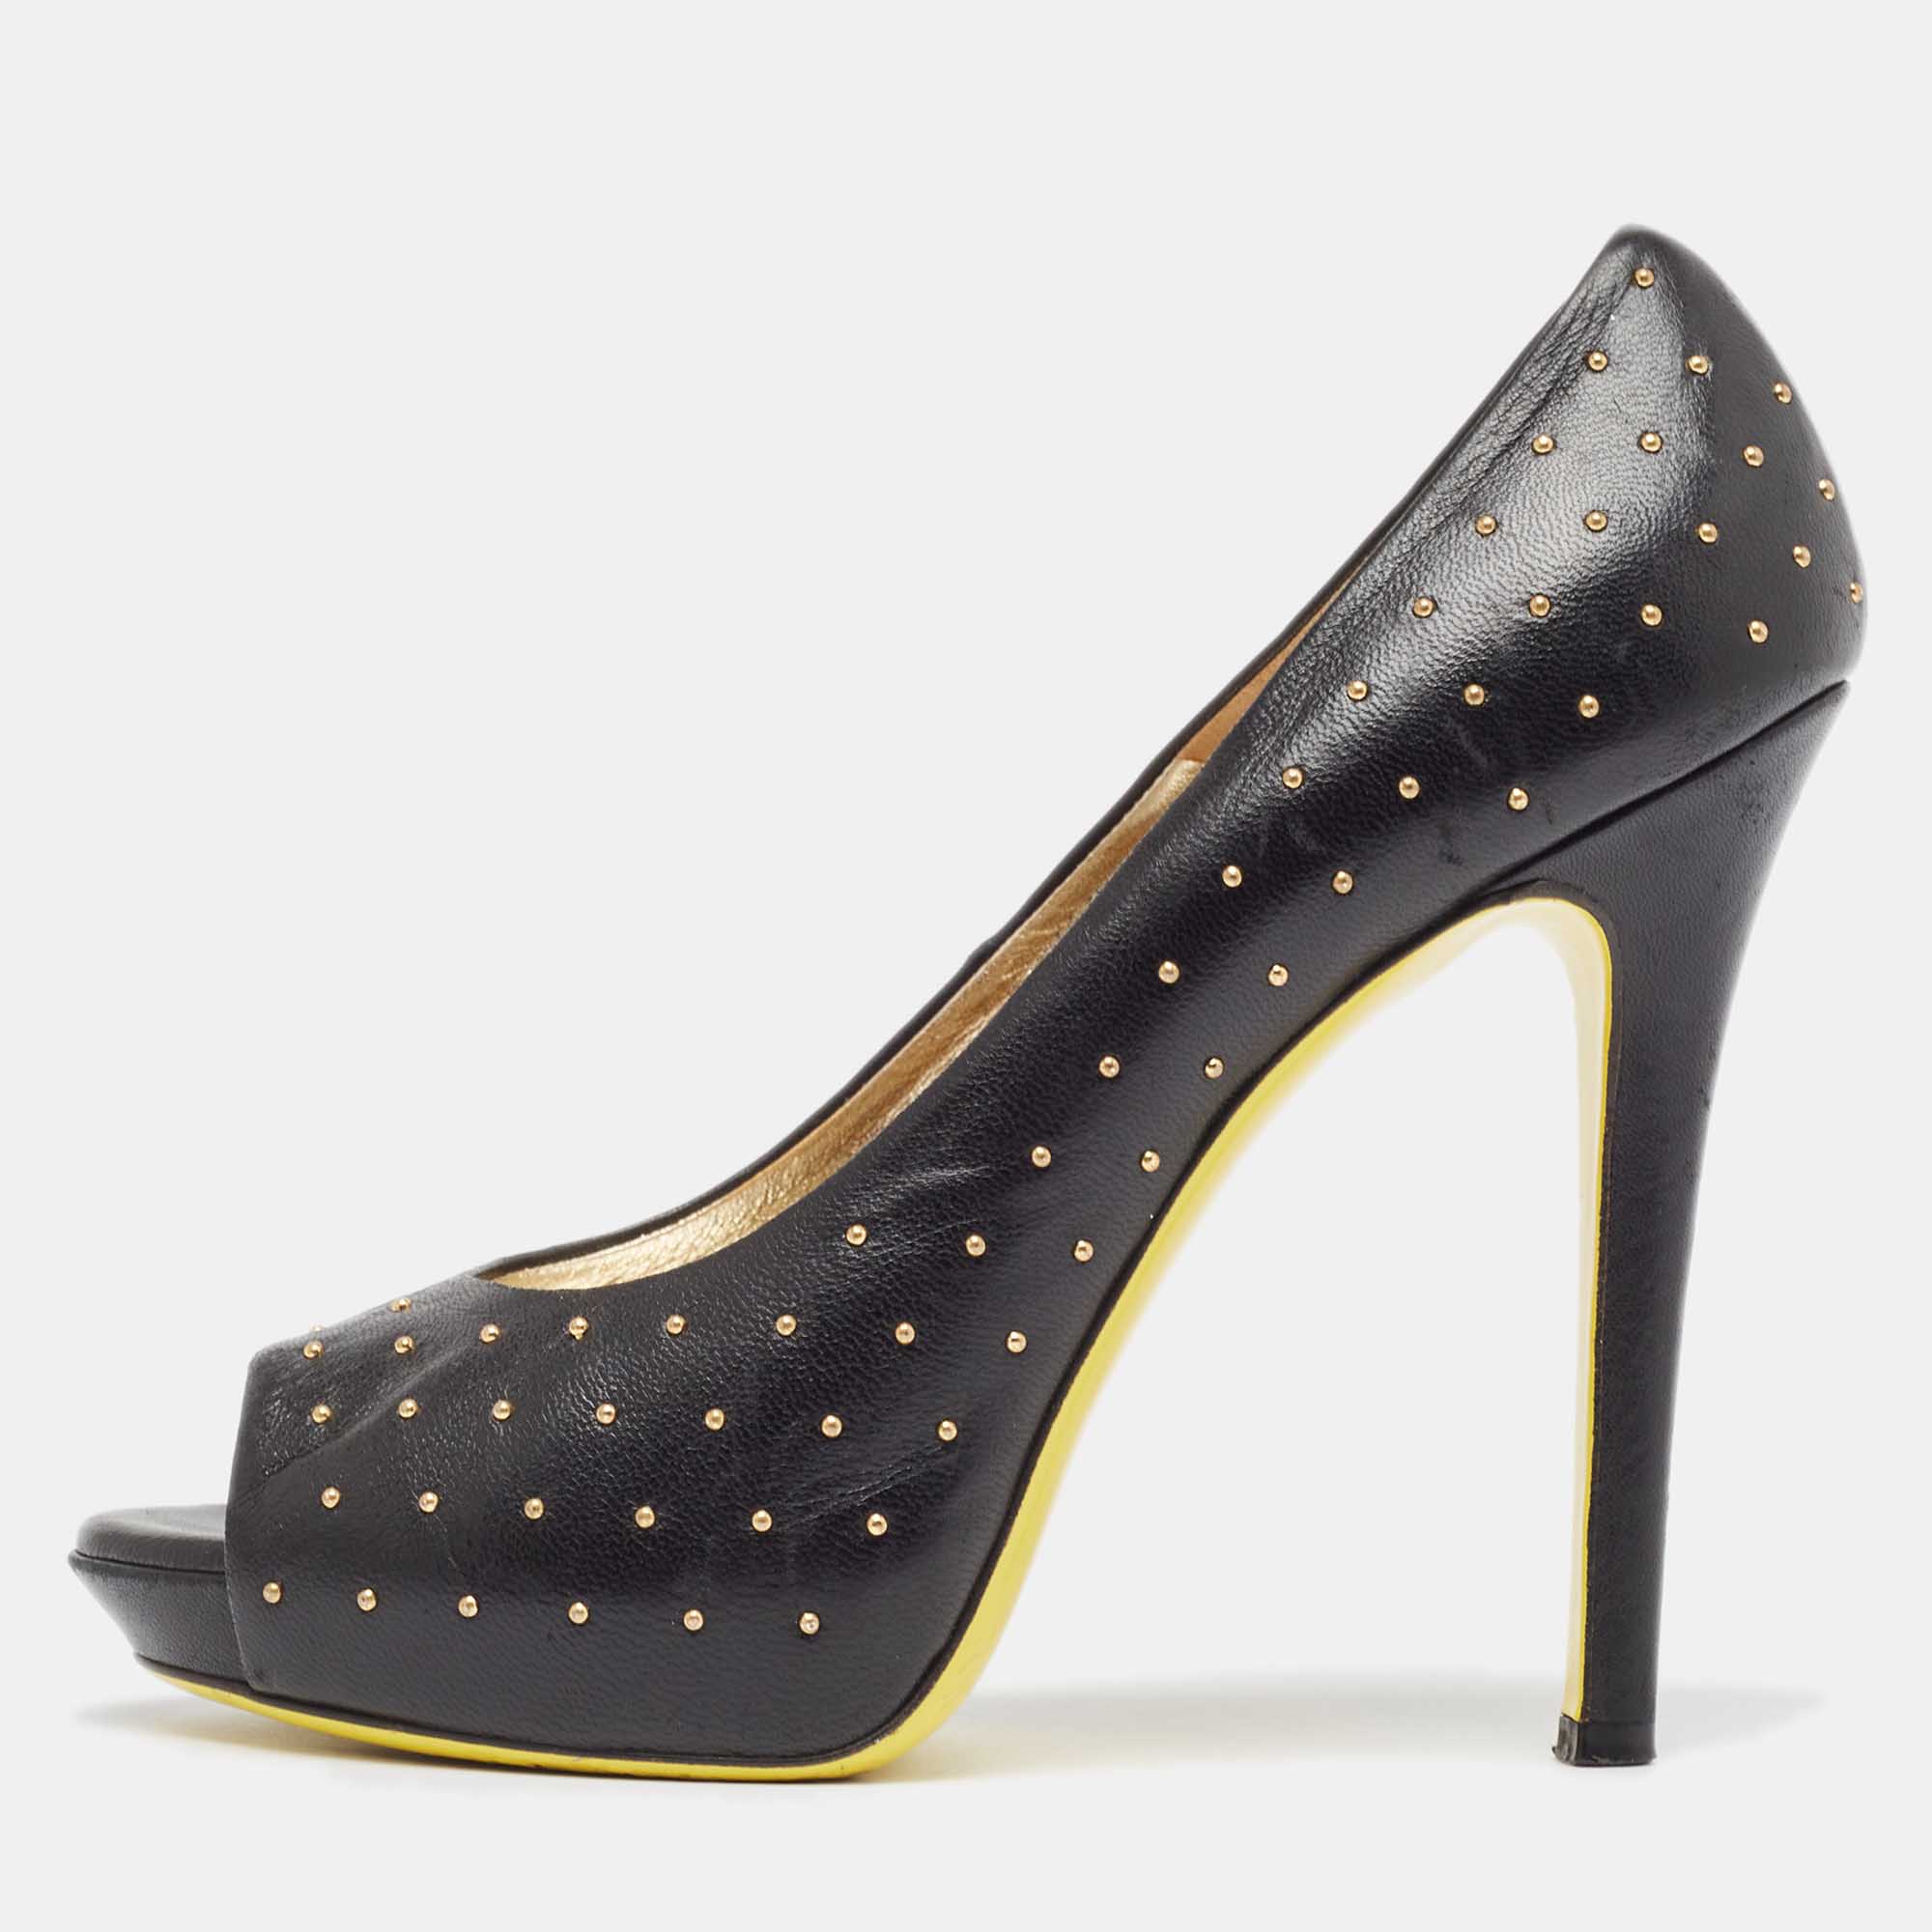 Versace black studded leather open toe pumps size 38